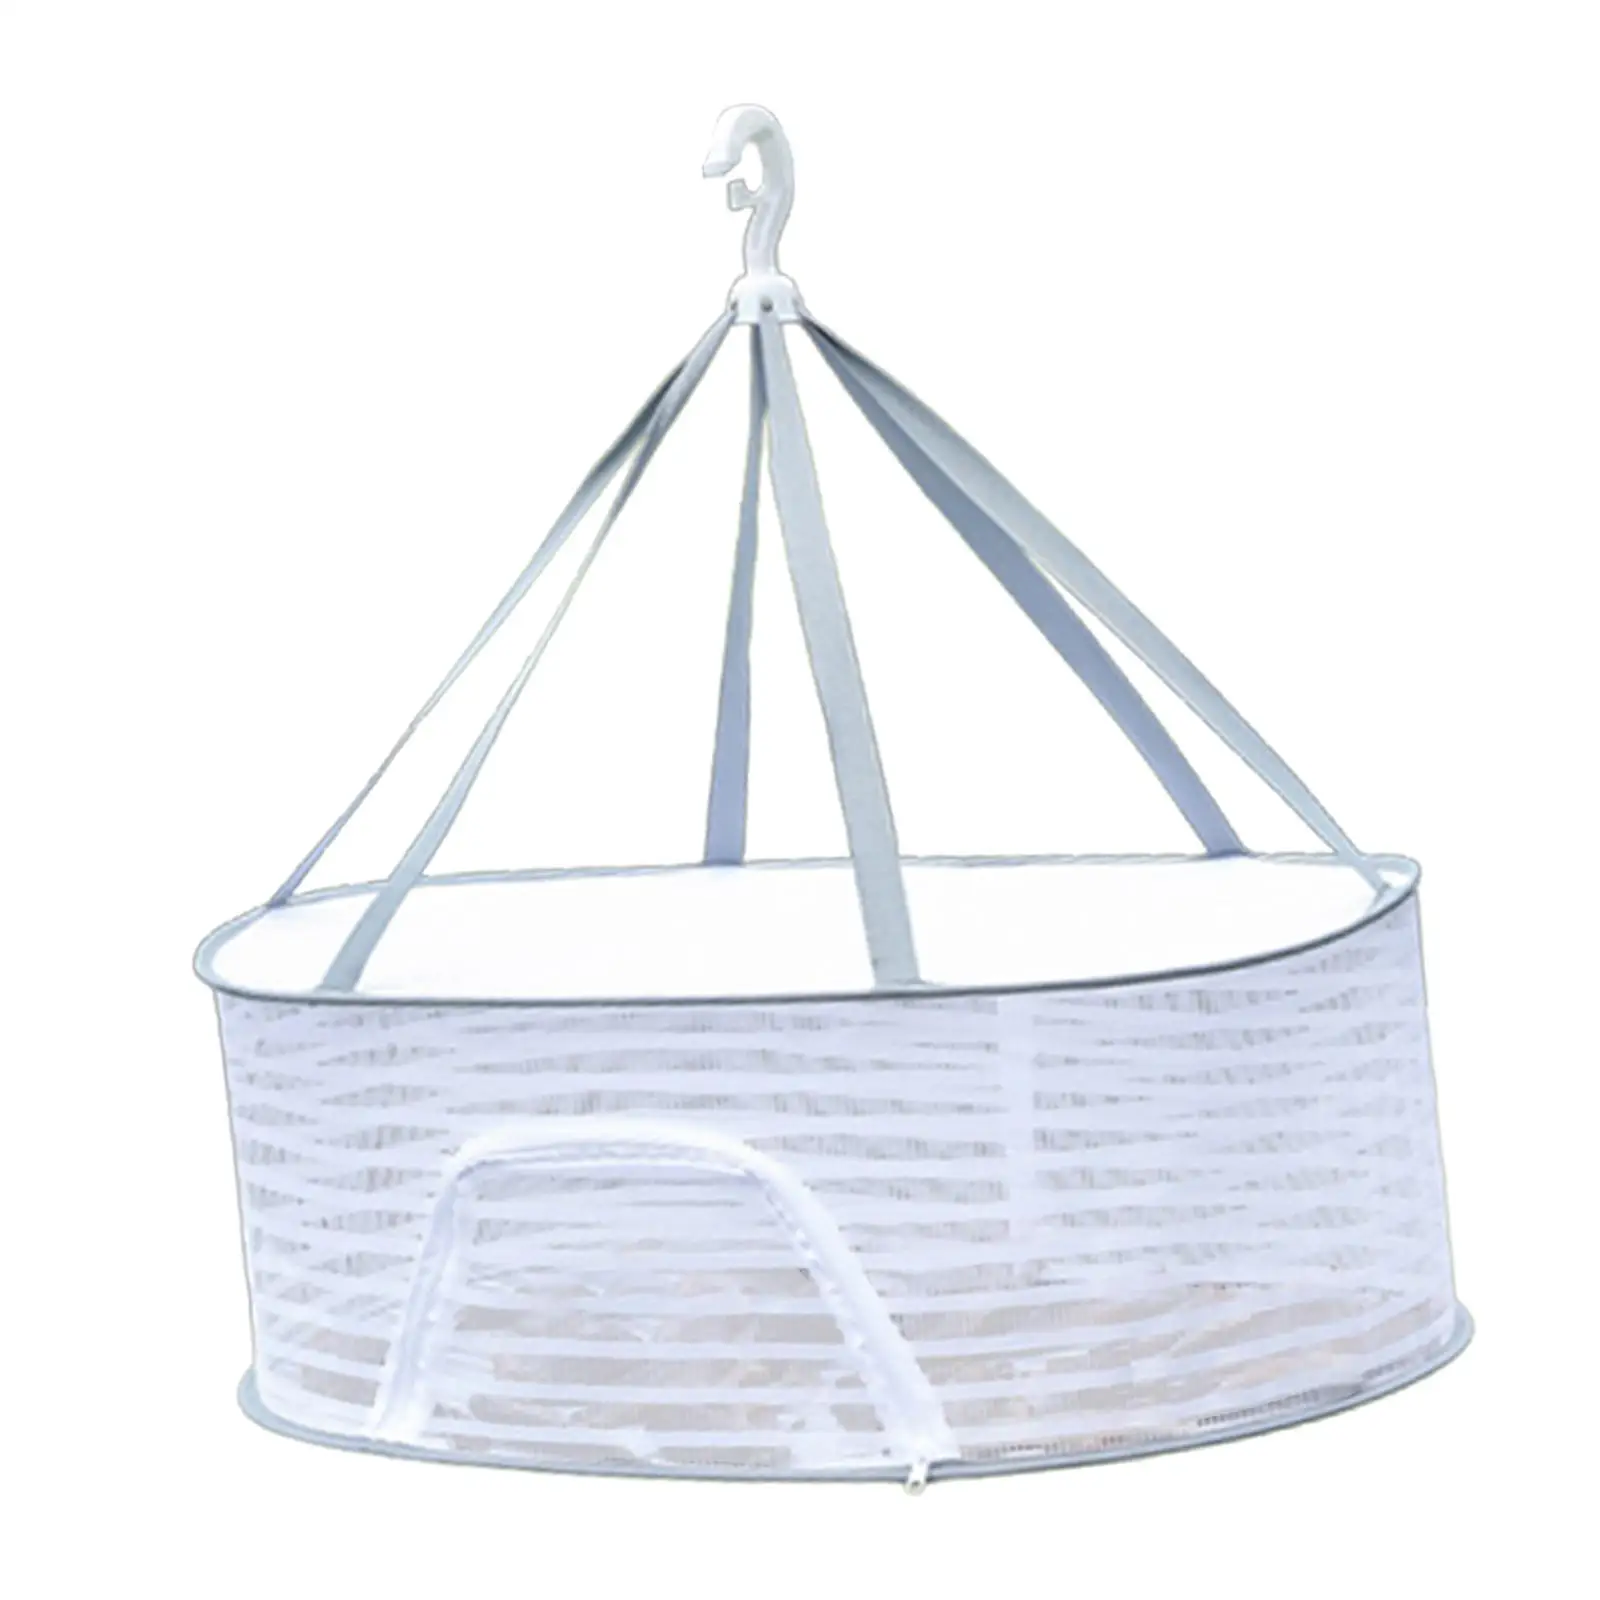 Versatile Sweater Drying Rack Fish Drying Net for Sweaters Clothes Plants